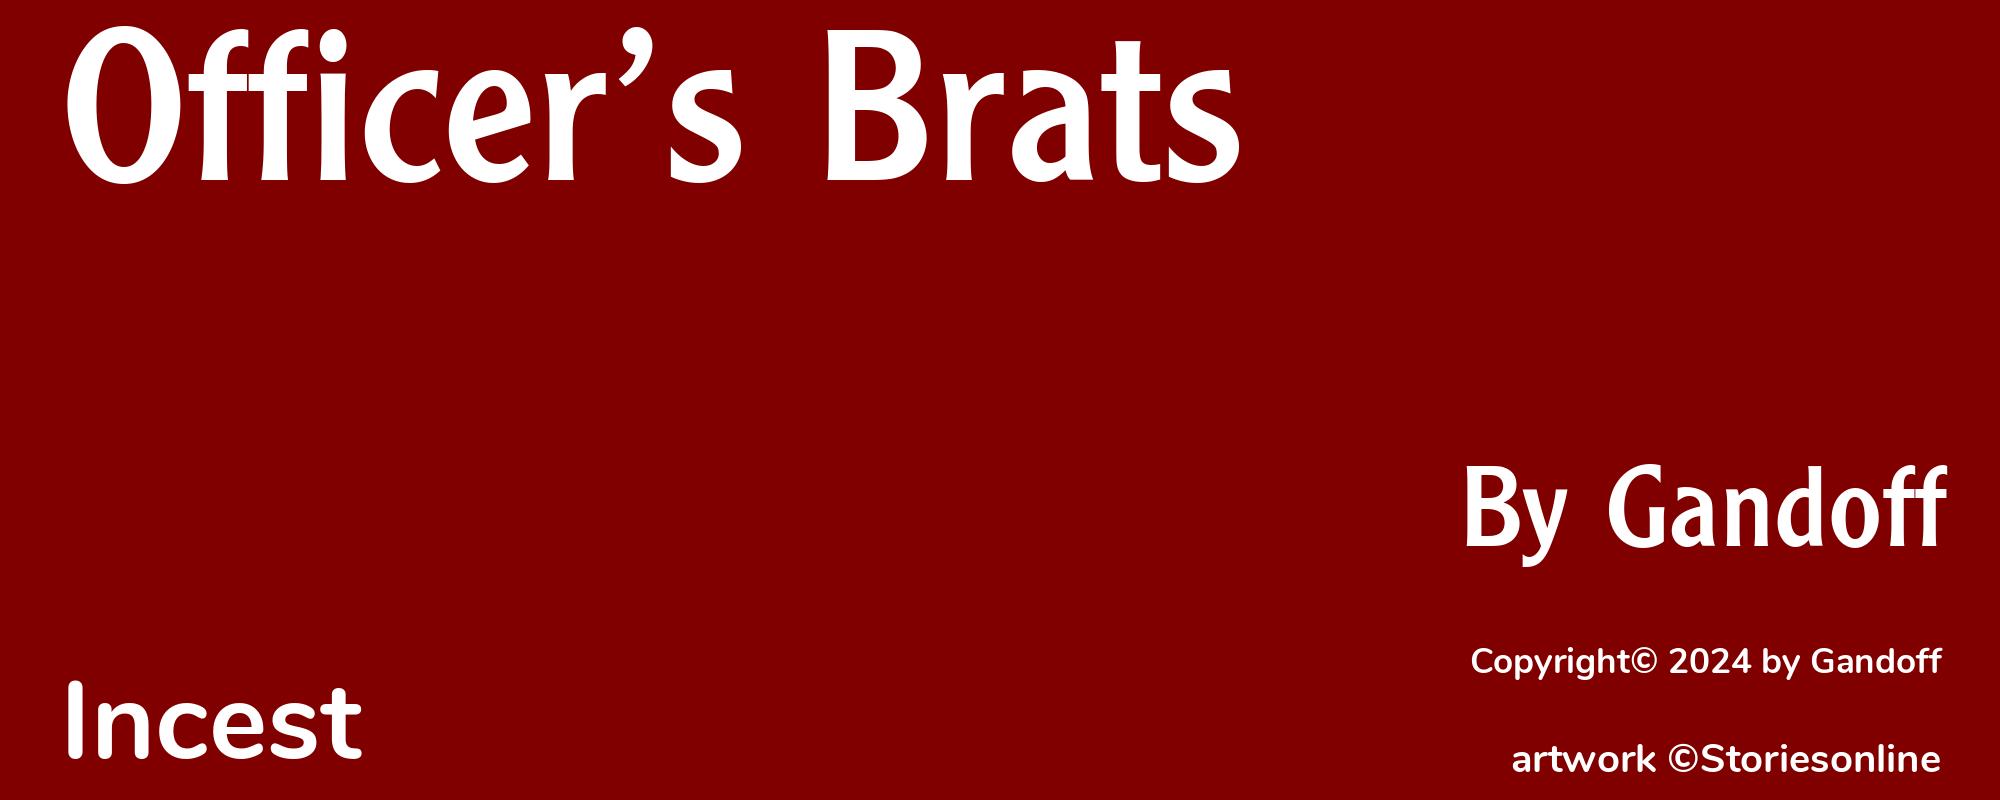 Officer’s Brats - Cover